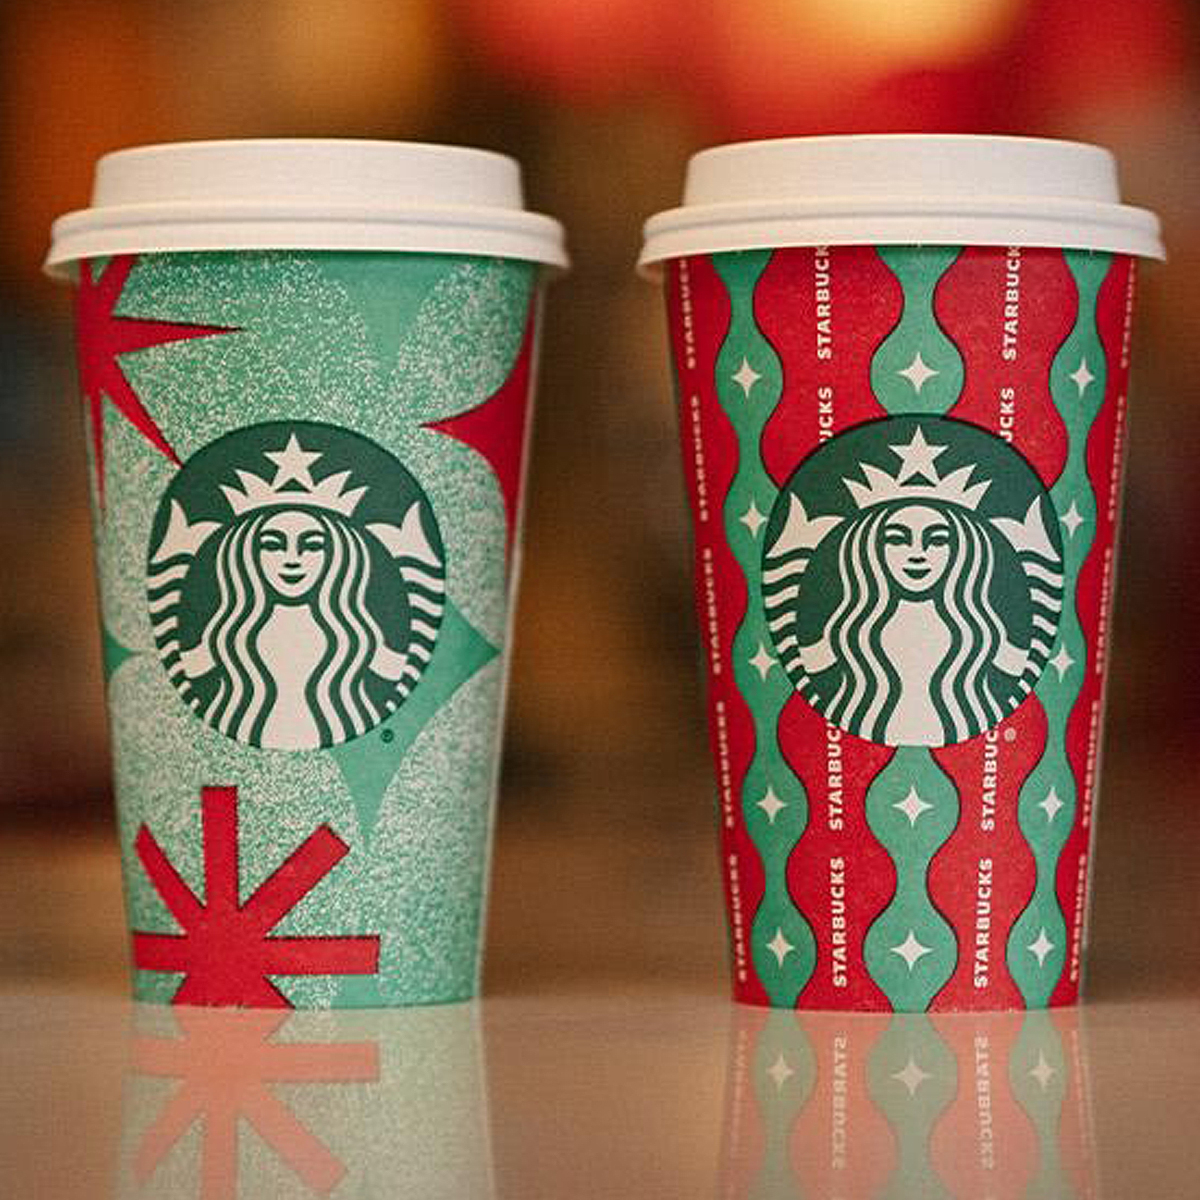 See Starbucks's New Holiday Cup Collection